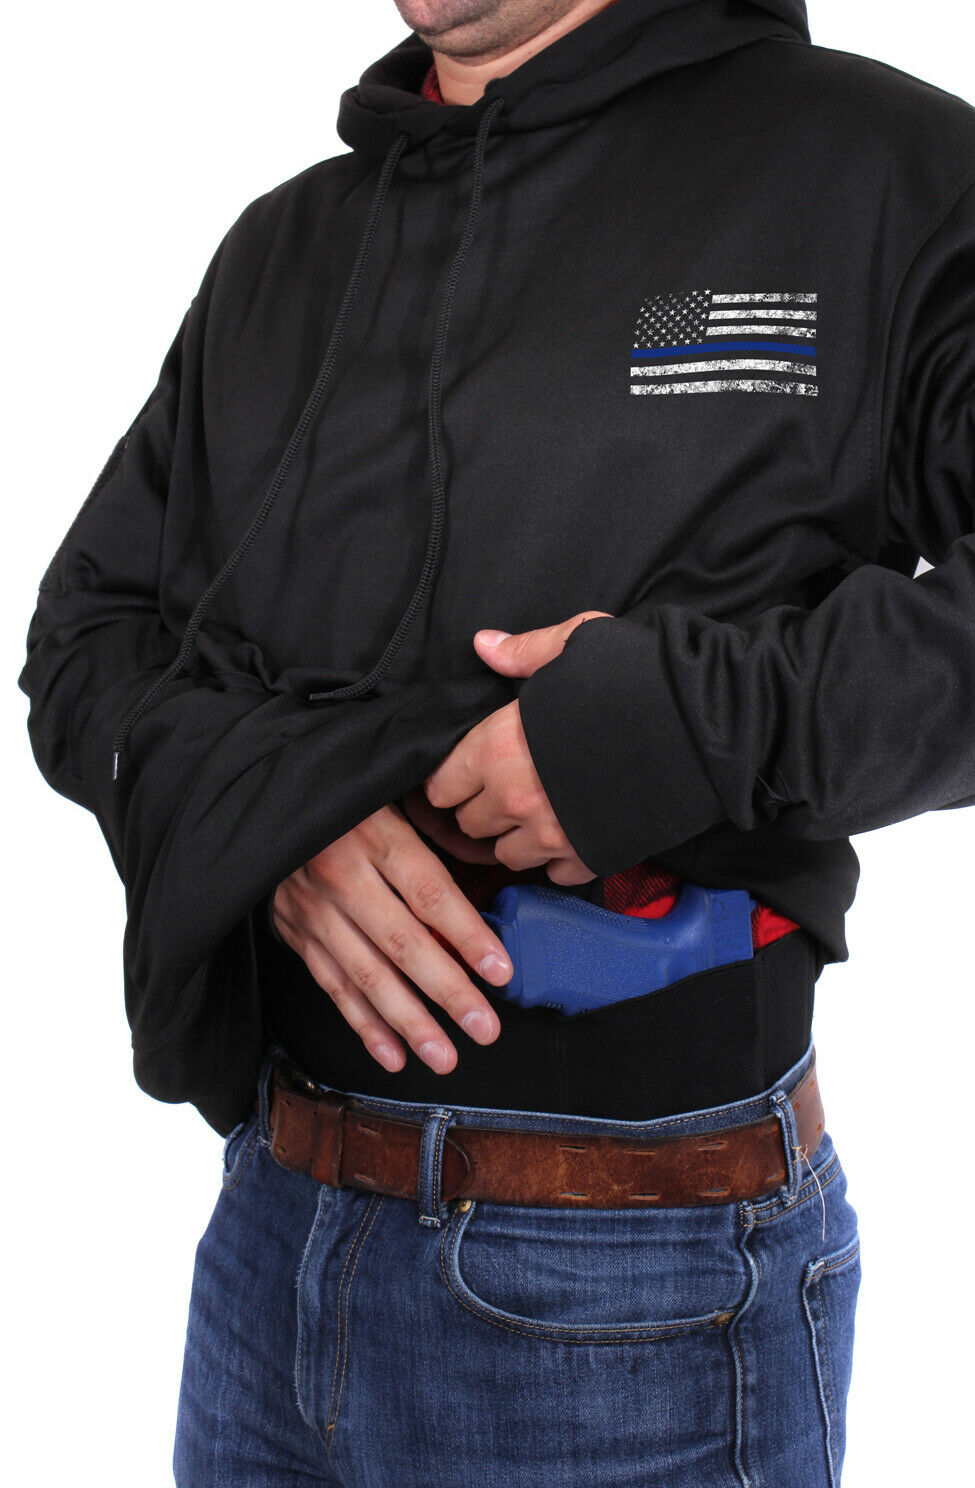 Rothco Thin Blue Line Concealed Carry Hoodie - Black